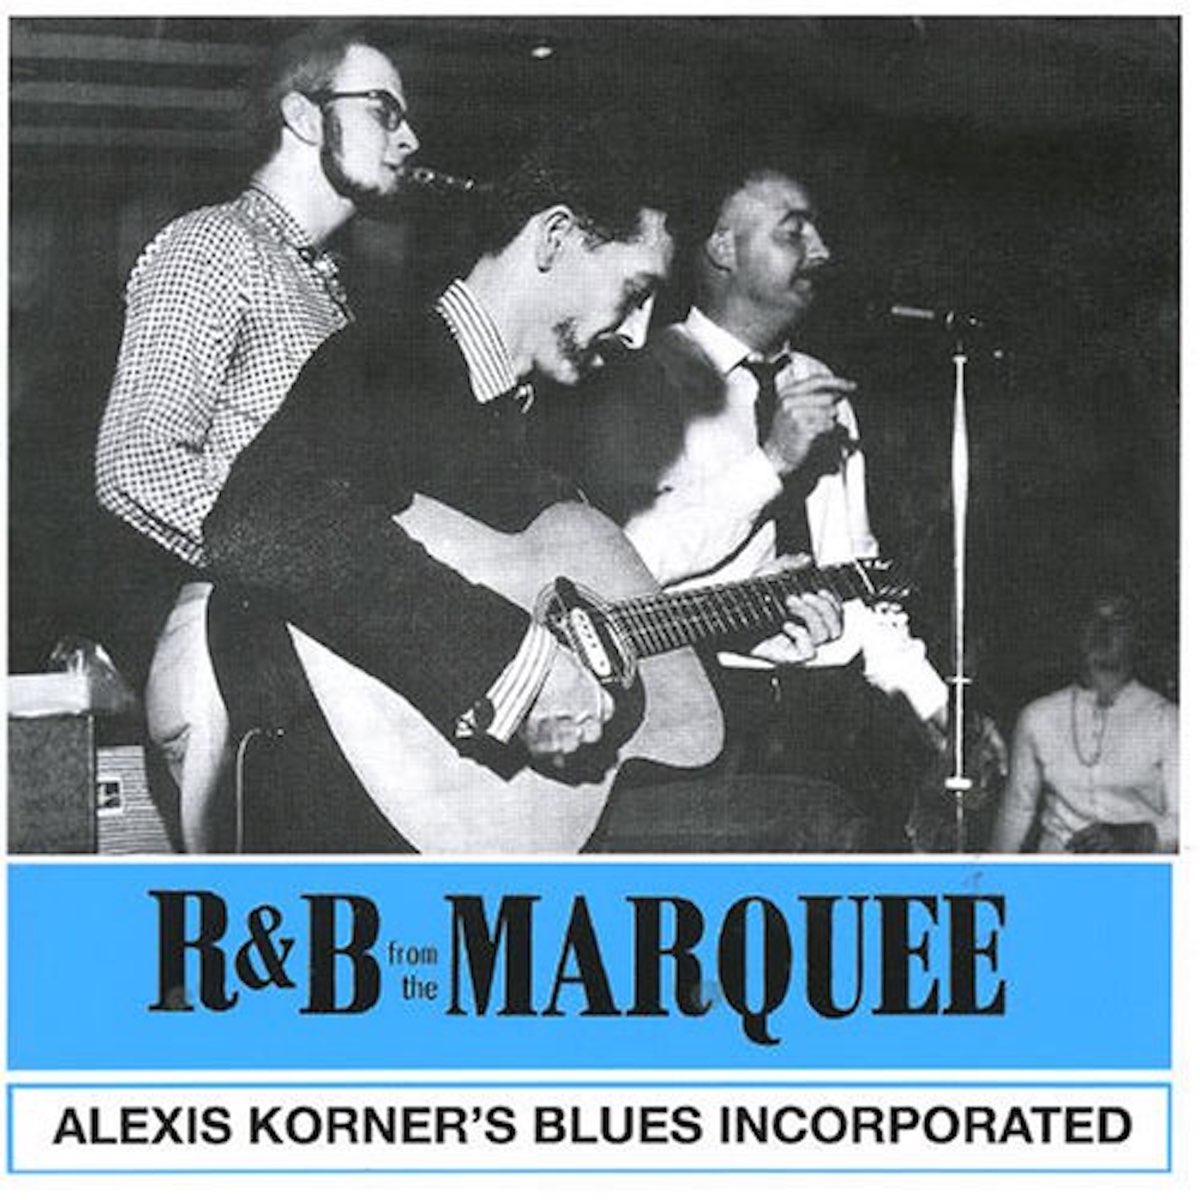 Alexis Korner’s Blues incorporated Blues from the Roundhouse Vol.2